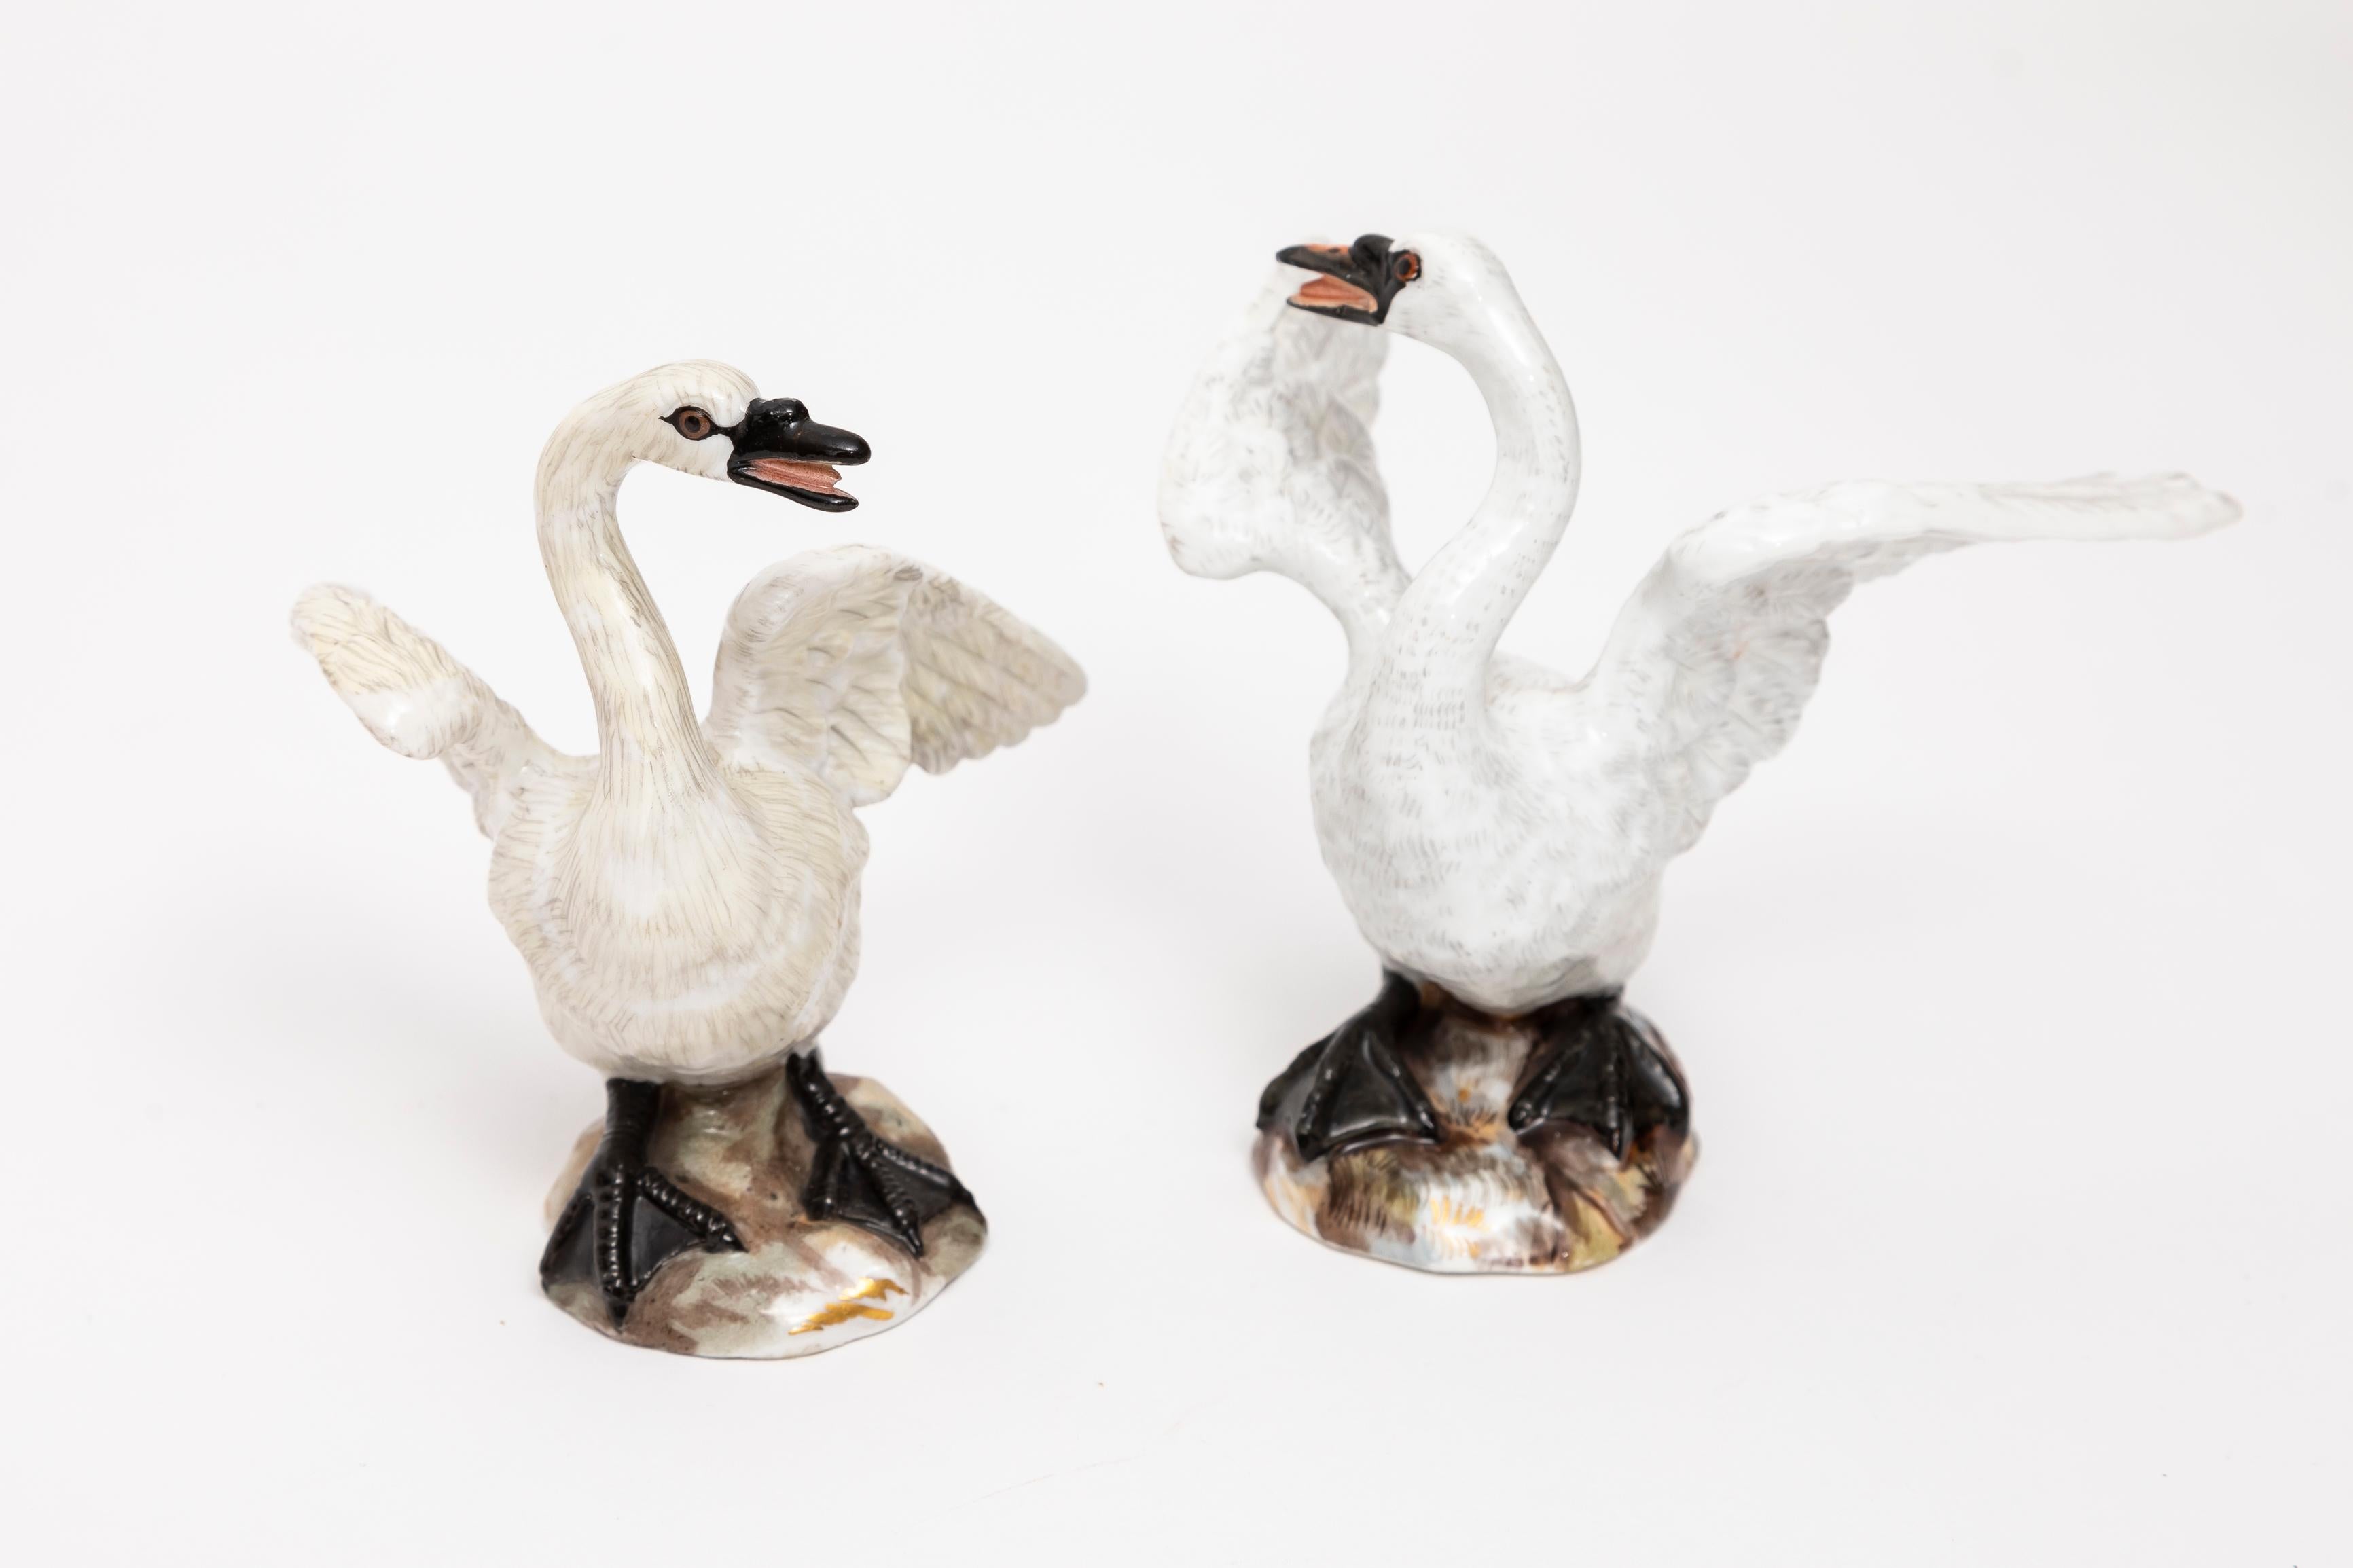 Rococo Revival A Pair of Early 19th Century Meissen Porcelain Figures of Swans For Sale